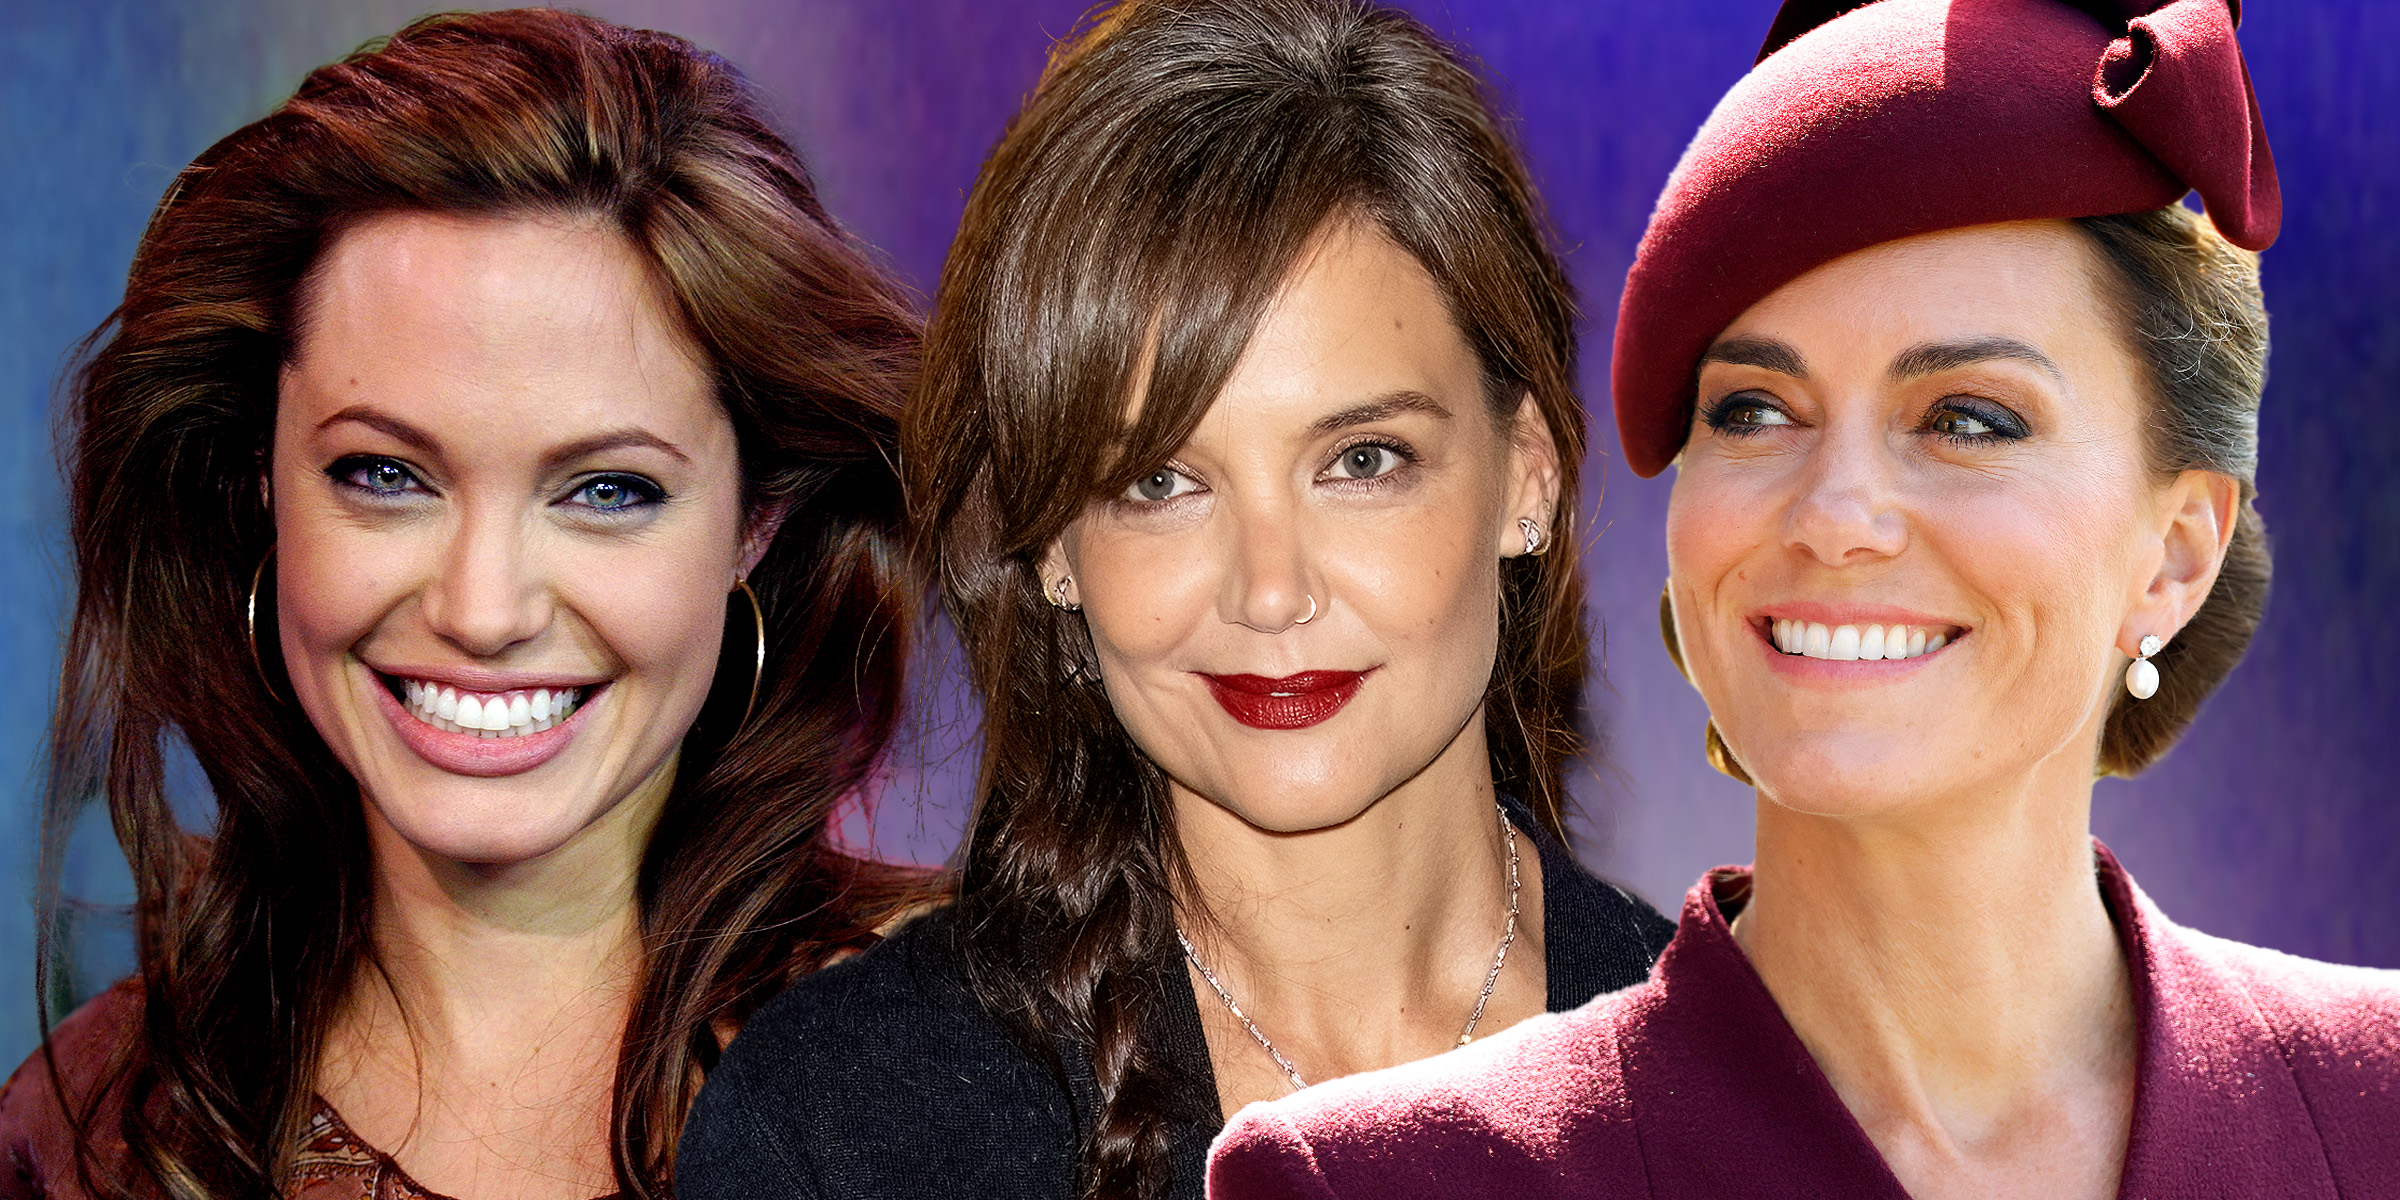 Angelina Jolie, Katie Holmes and Princess Catherine | Source: Getty Images